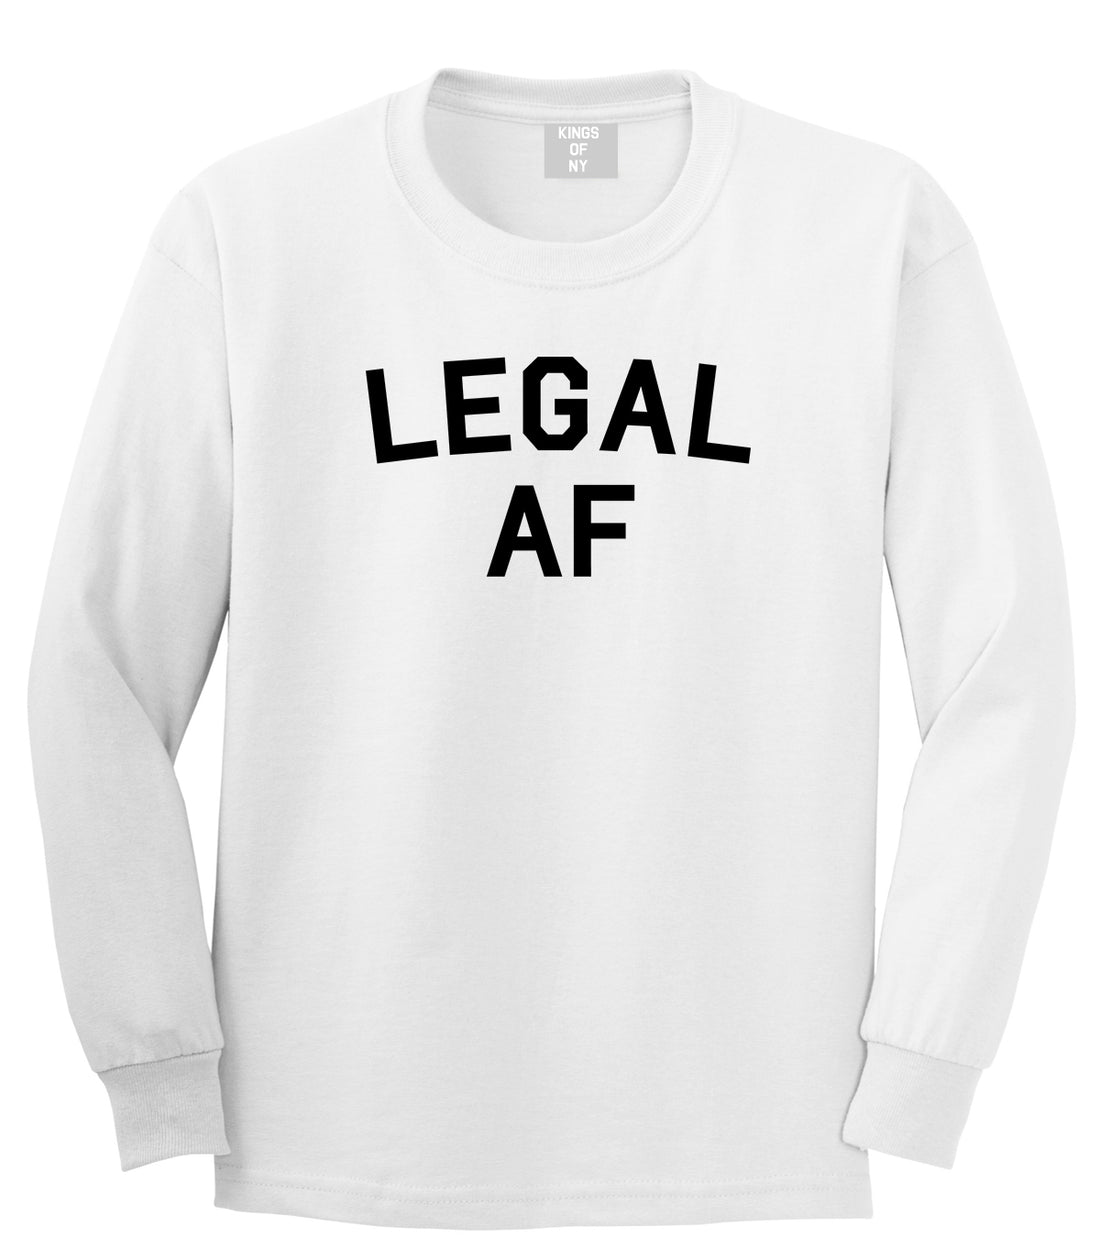 Legal AF 21st Birthday Mens Long Sleeve T-Shirt White by Kings Of NY